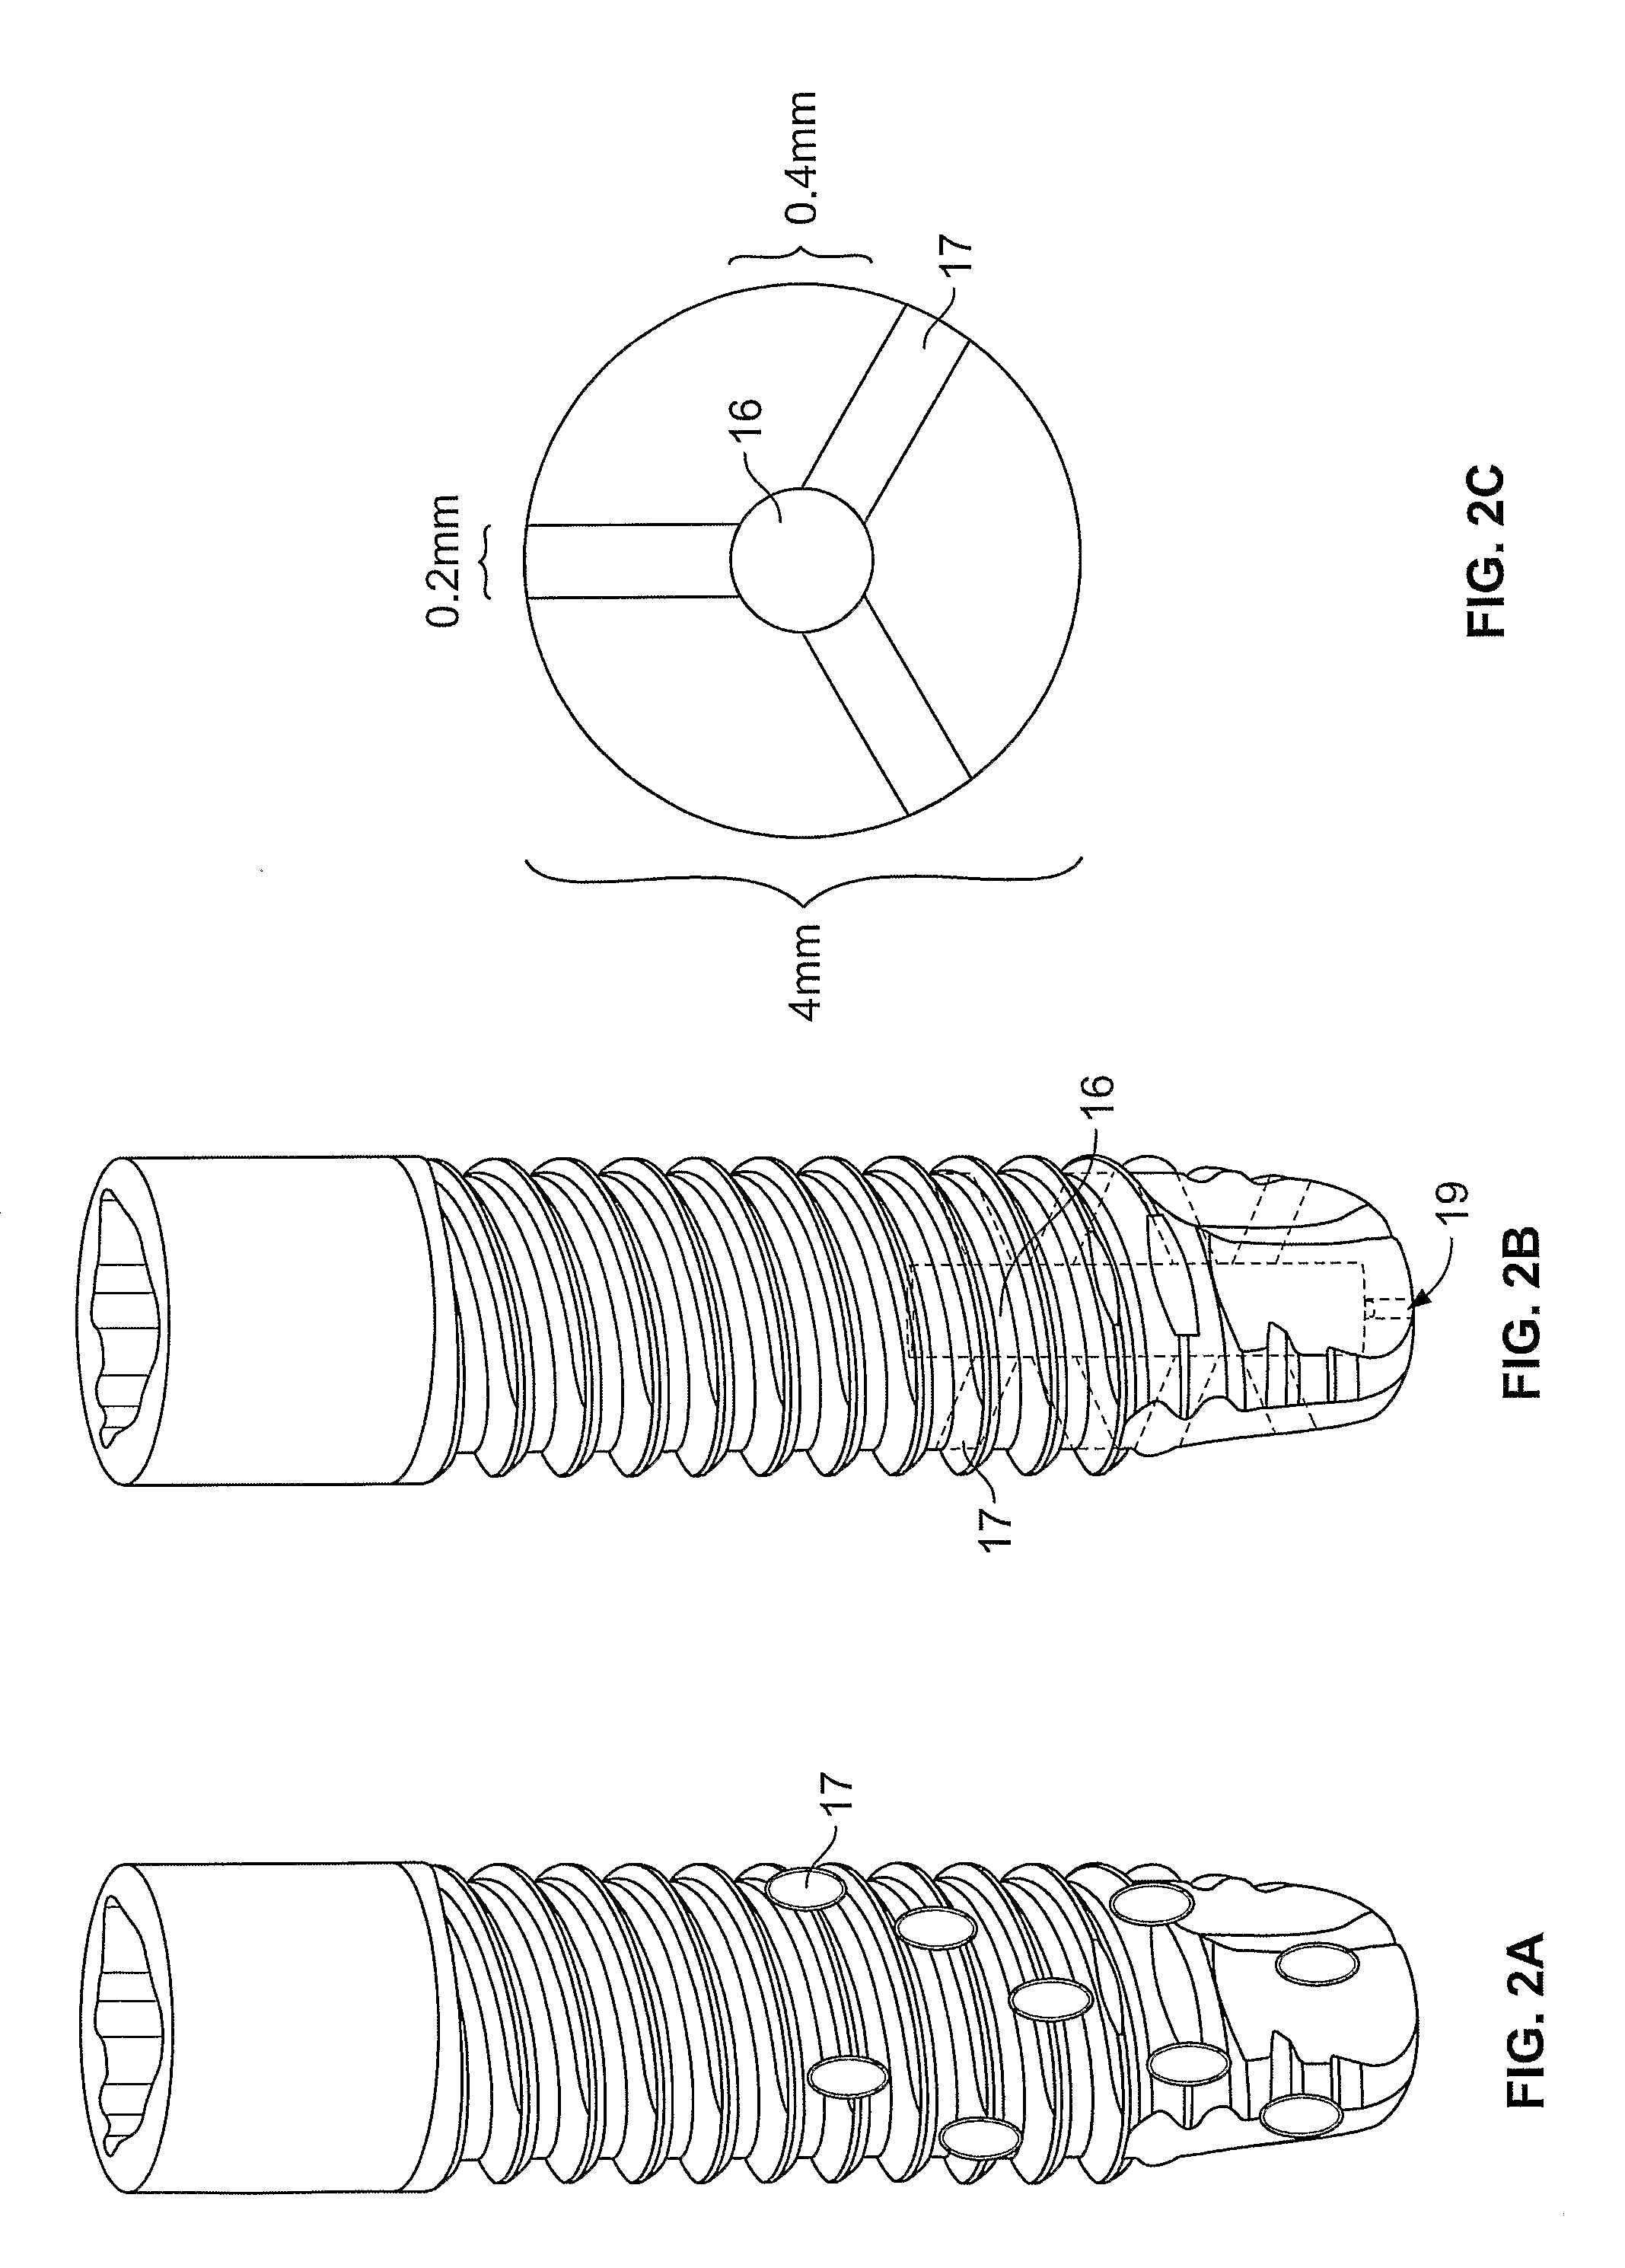 Dental Implant Screw and Method of Use